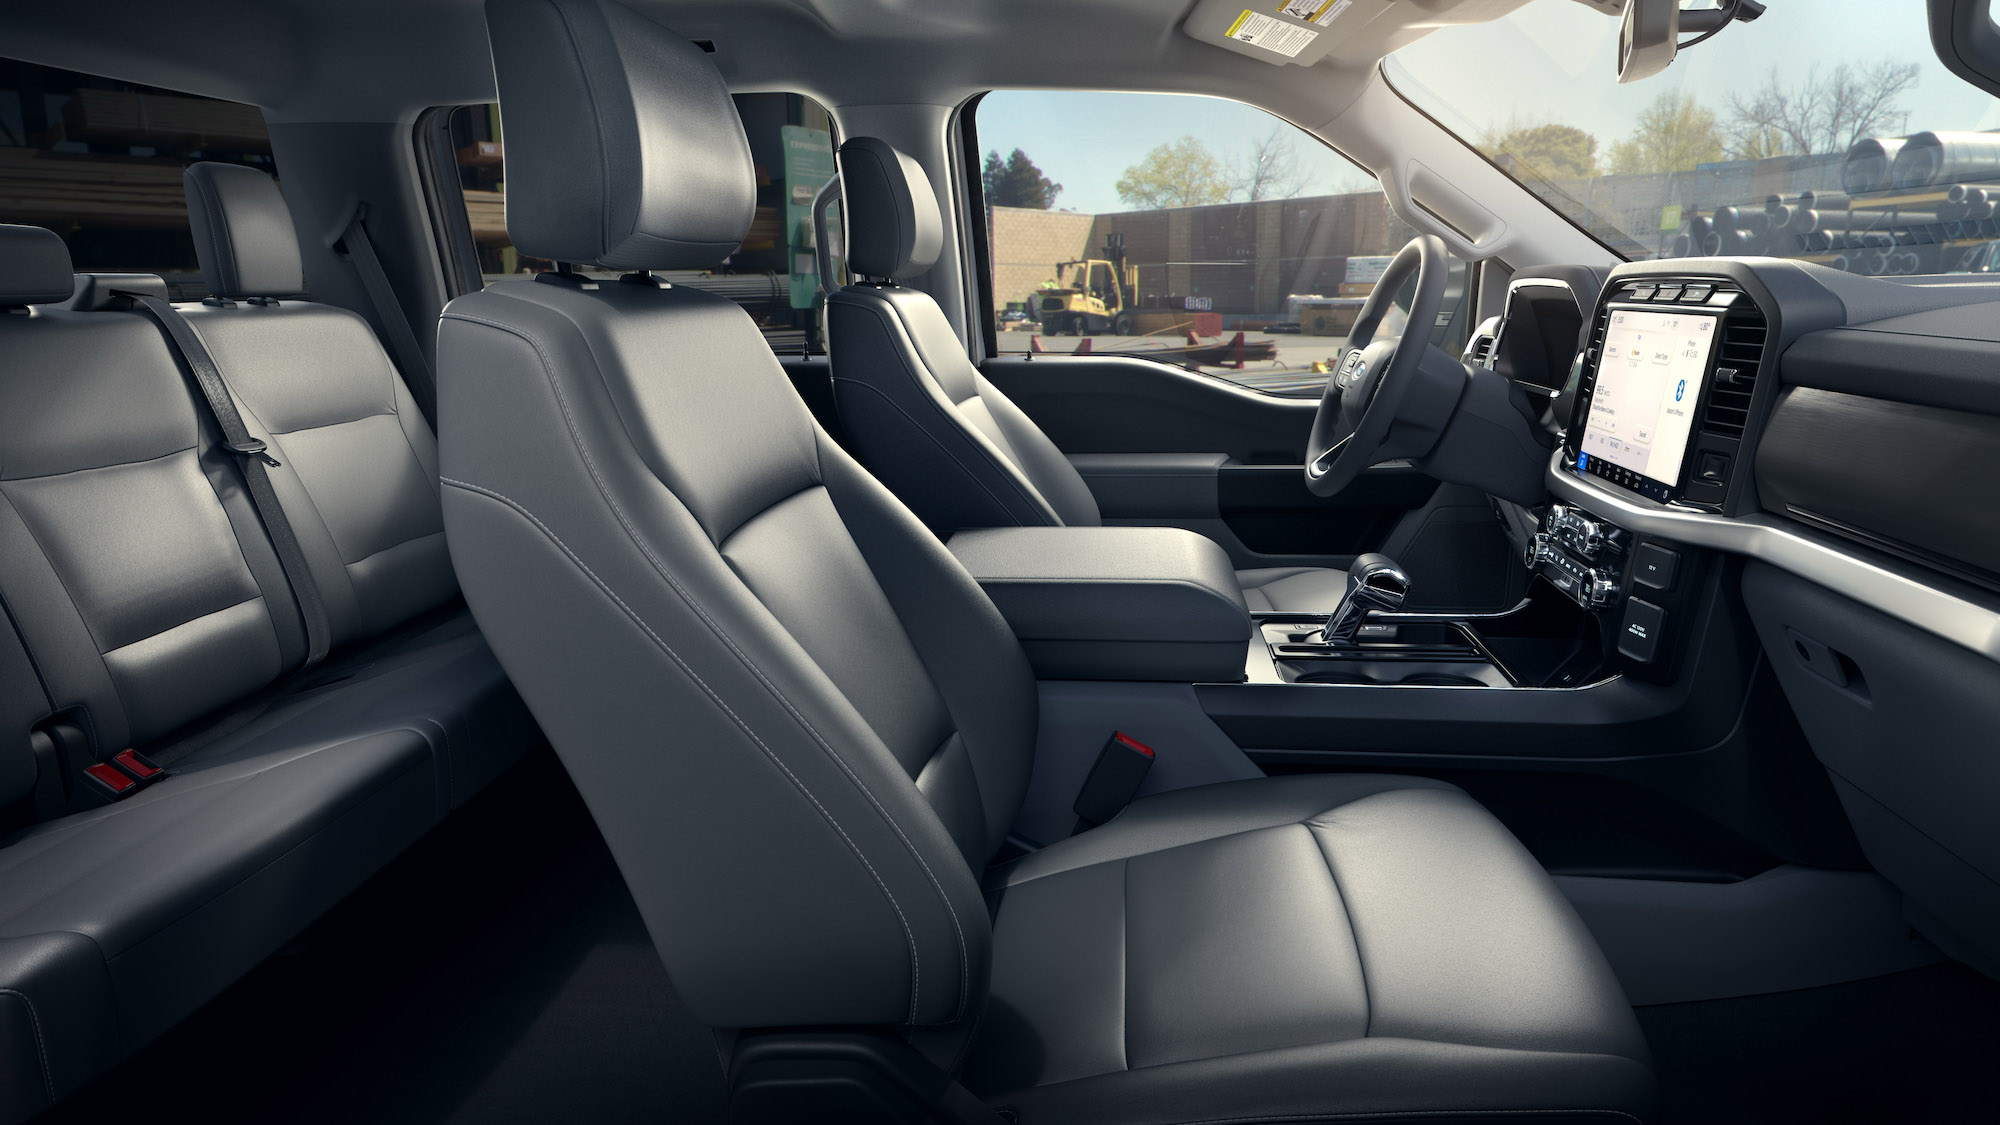 The gray interior of a 2022 Ford F-150 Lightning Pro electric work truck